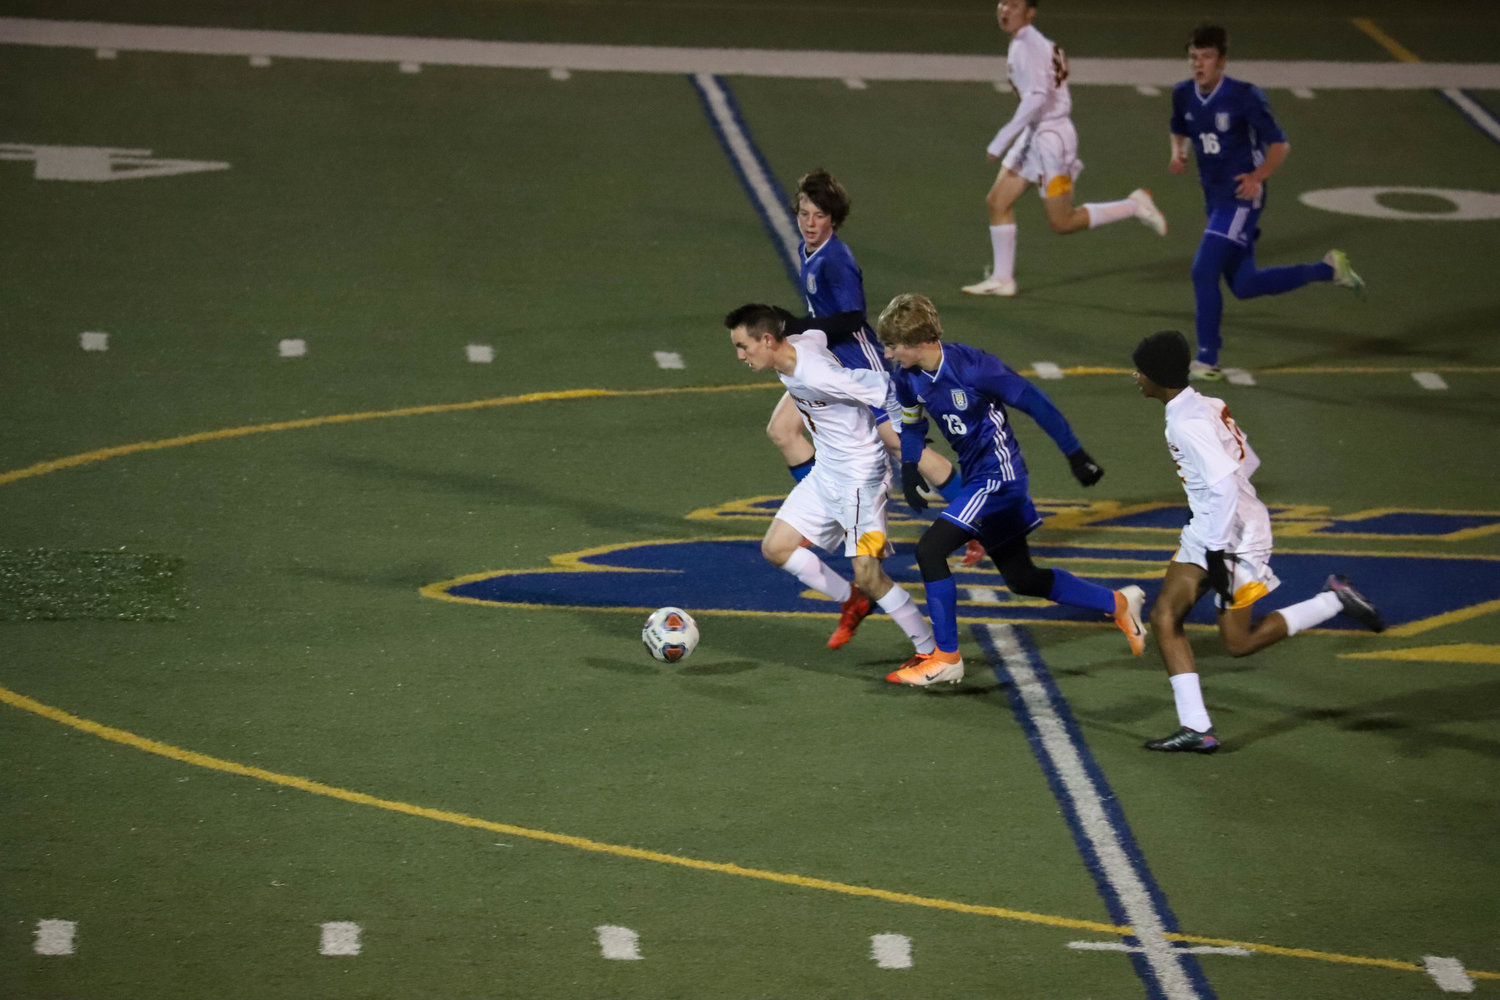 MMA’s Michael Wever was recently named to the All-Region soccer team; Wever also made the All-District team, along with senior William Cash of Indianapolis, Ind., and junior Marco Afane of La Libertad, El Salvador. [MMA Photo]